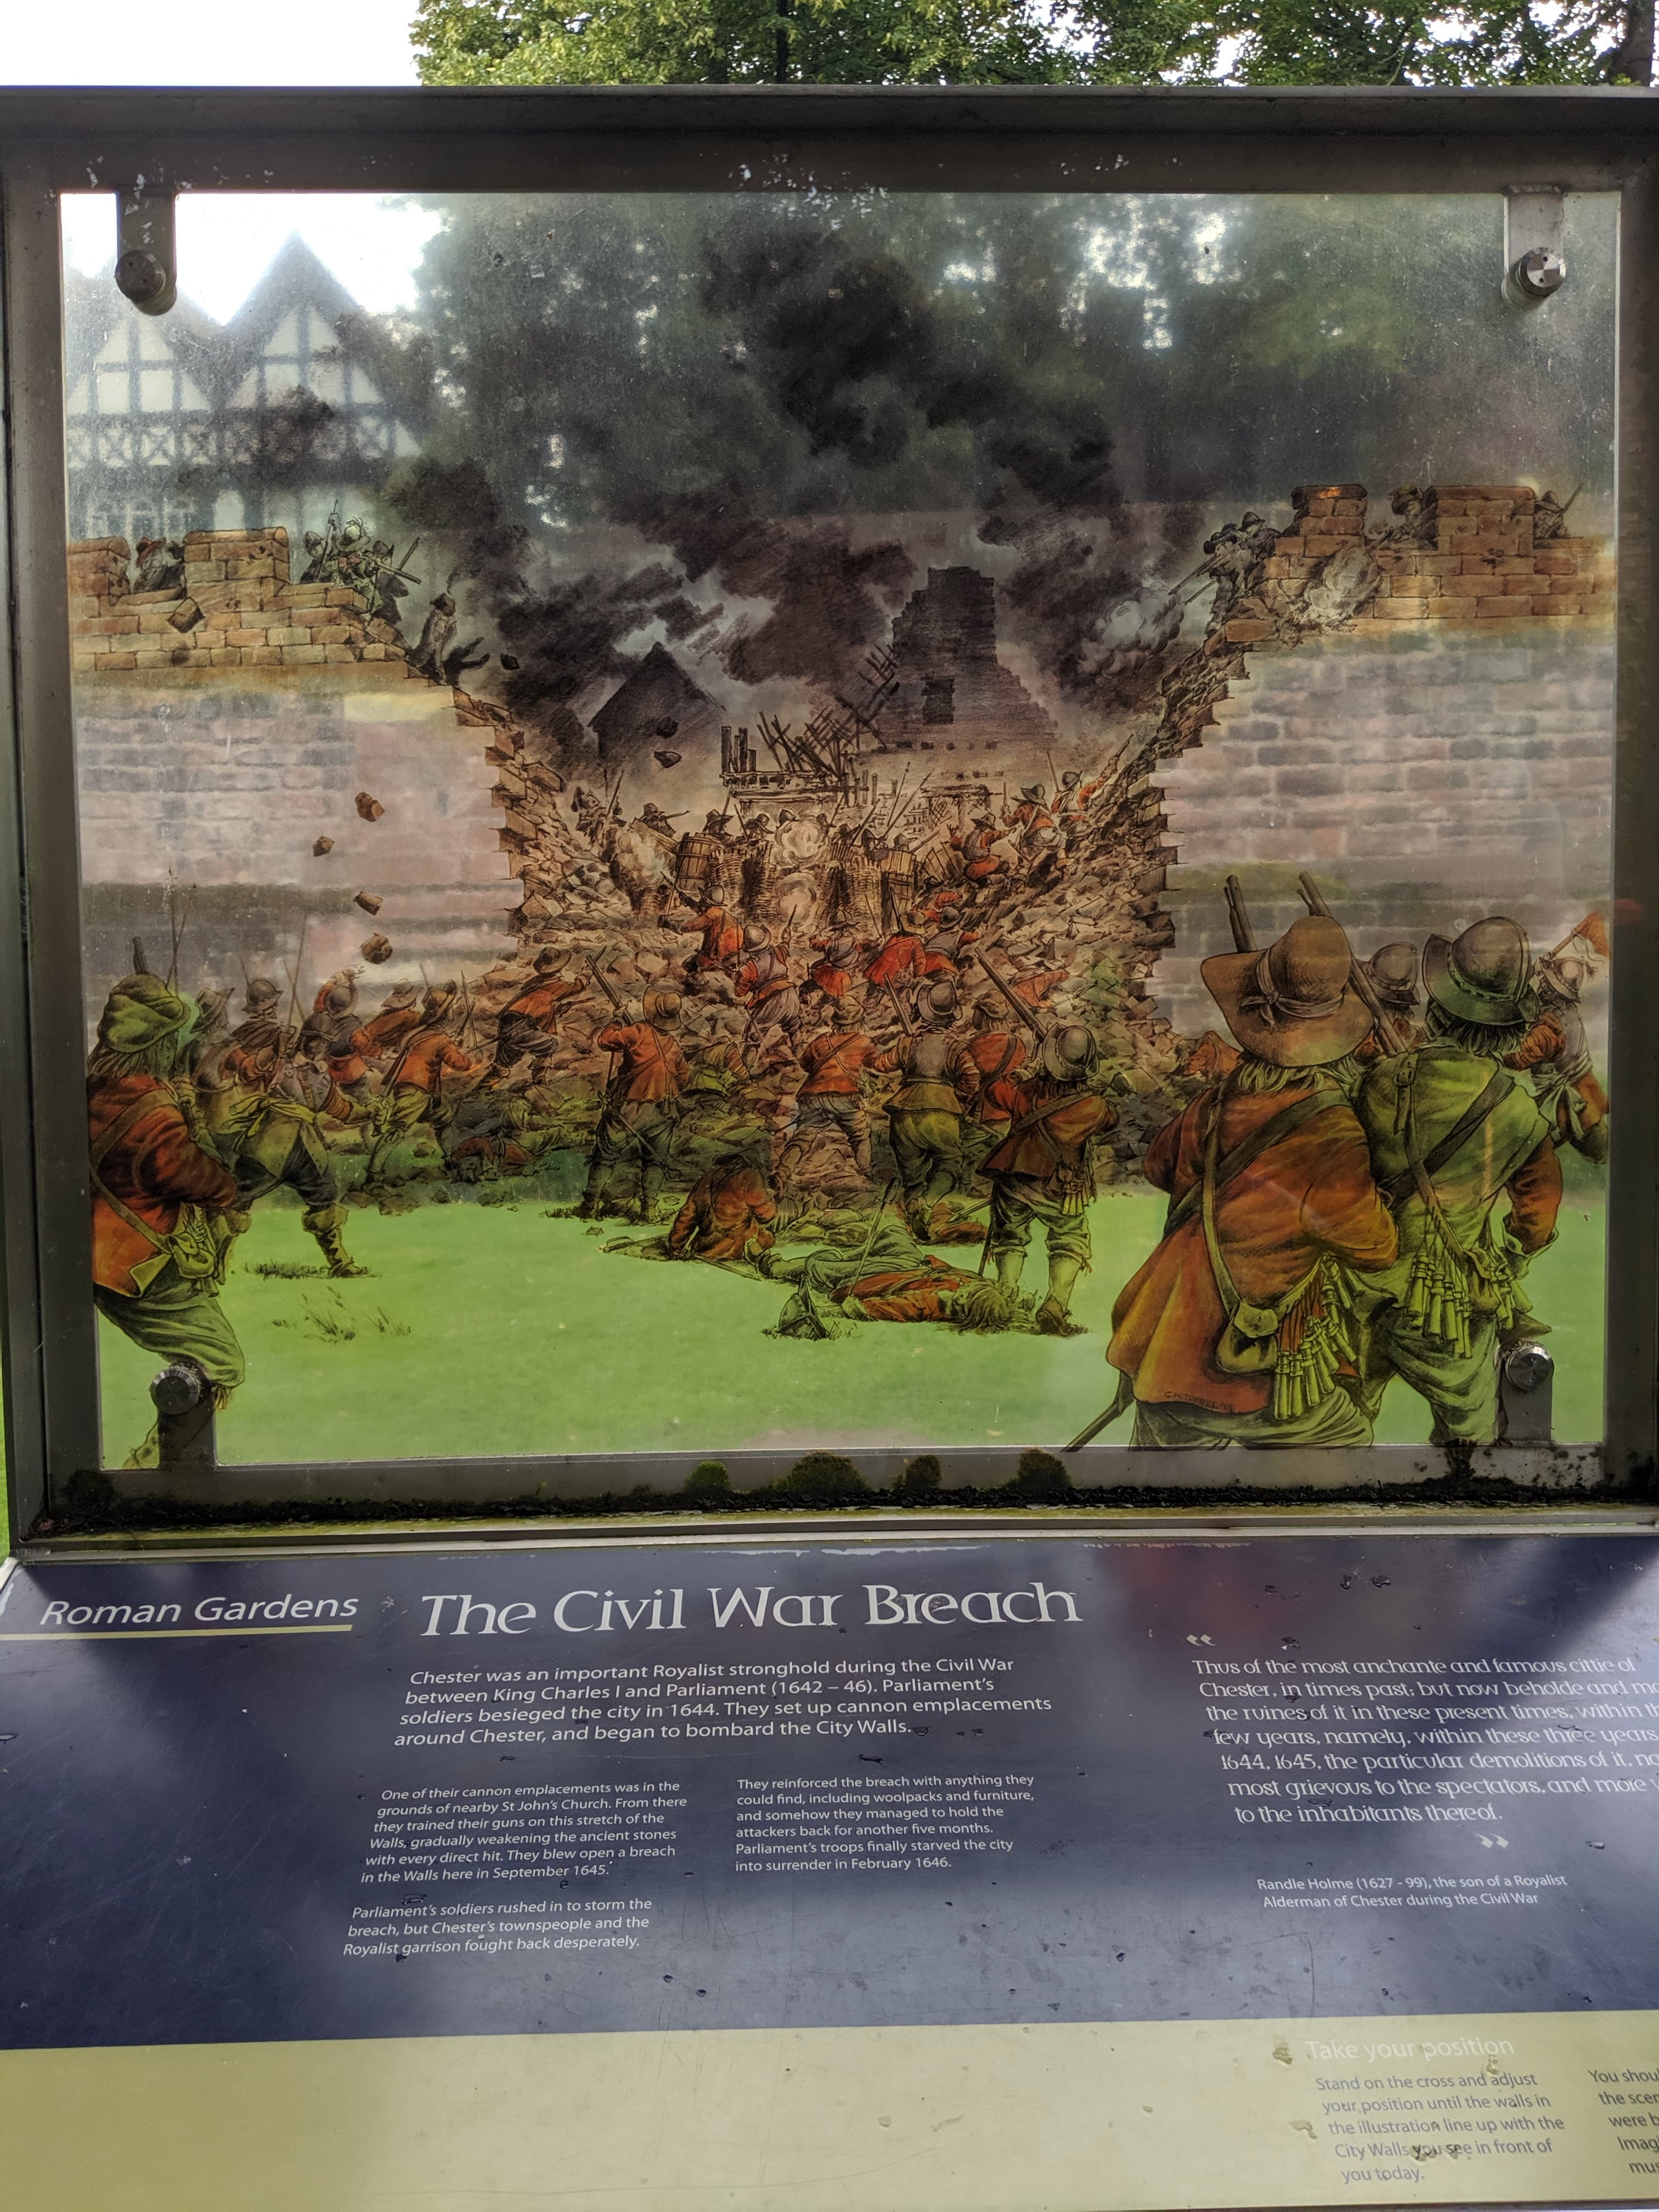 Image of Roman Gardens and Civil War Breach AR experience